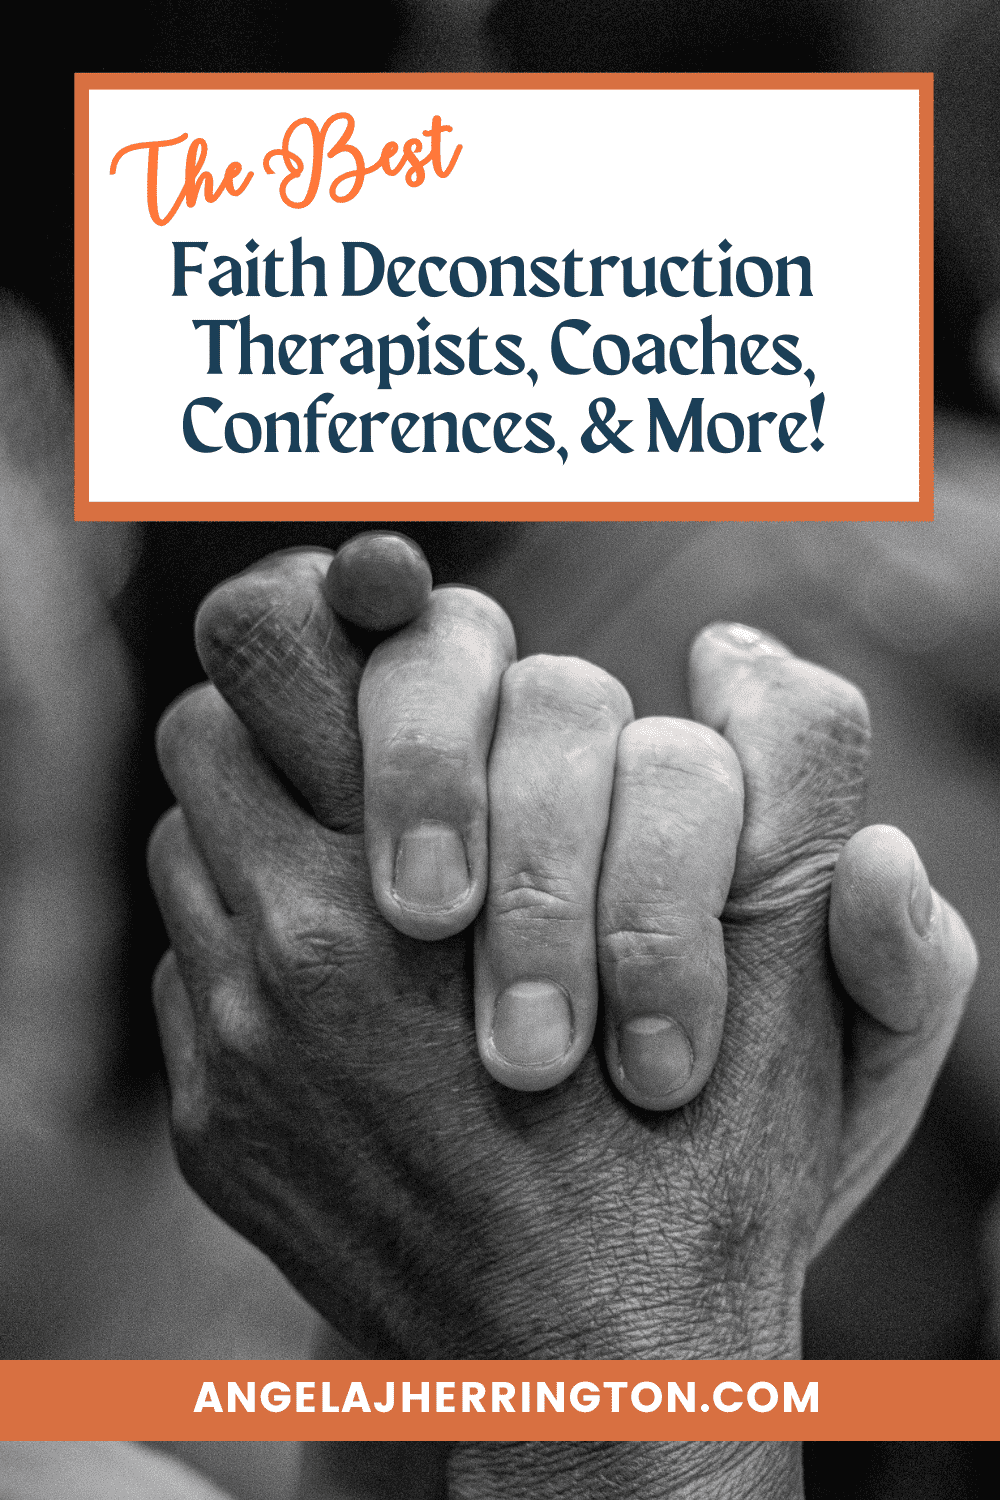 Wondering where to find a faith deconstruction confererence or event? Click here for my recommended list.